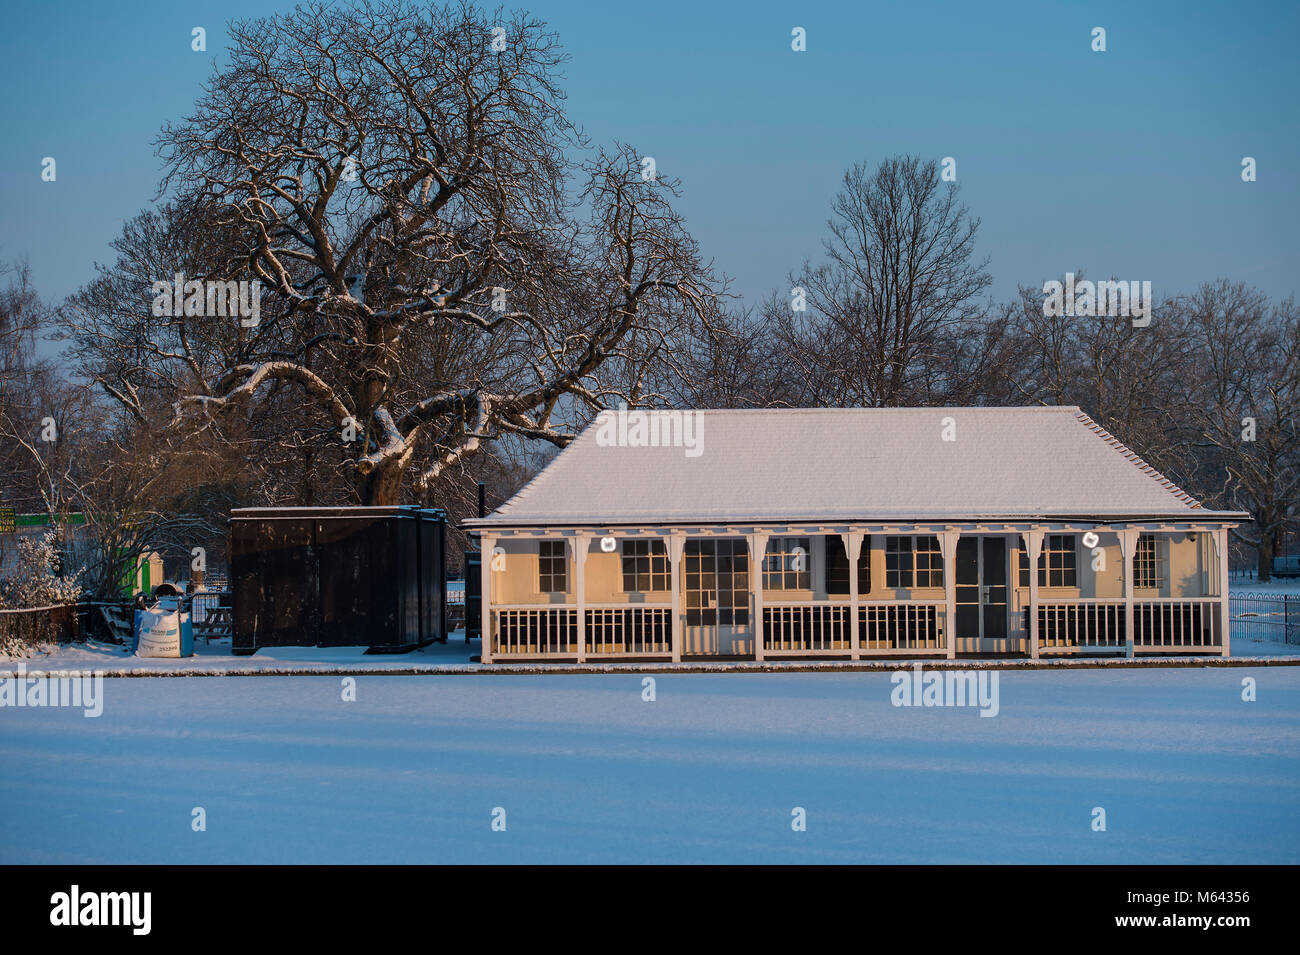 London, UK. 28th Feb, 2018. UK Weather: The Bowling Pavilion in the early sun - Families and commuters cross Clapham Common after the snow has fallen in freezing temperatures. Credit: Guy Bell/Alamy Live News Stock Photo